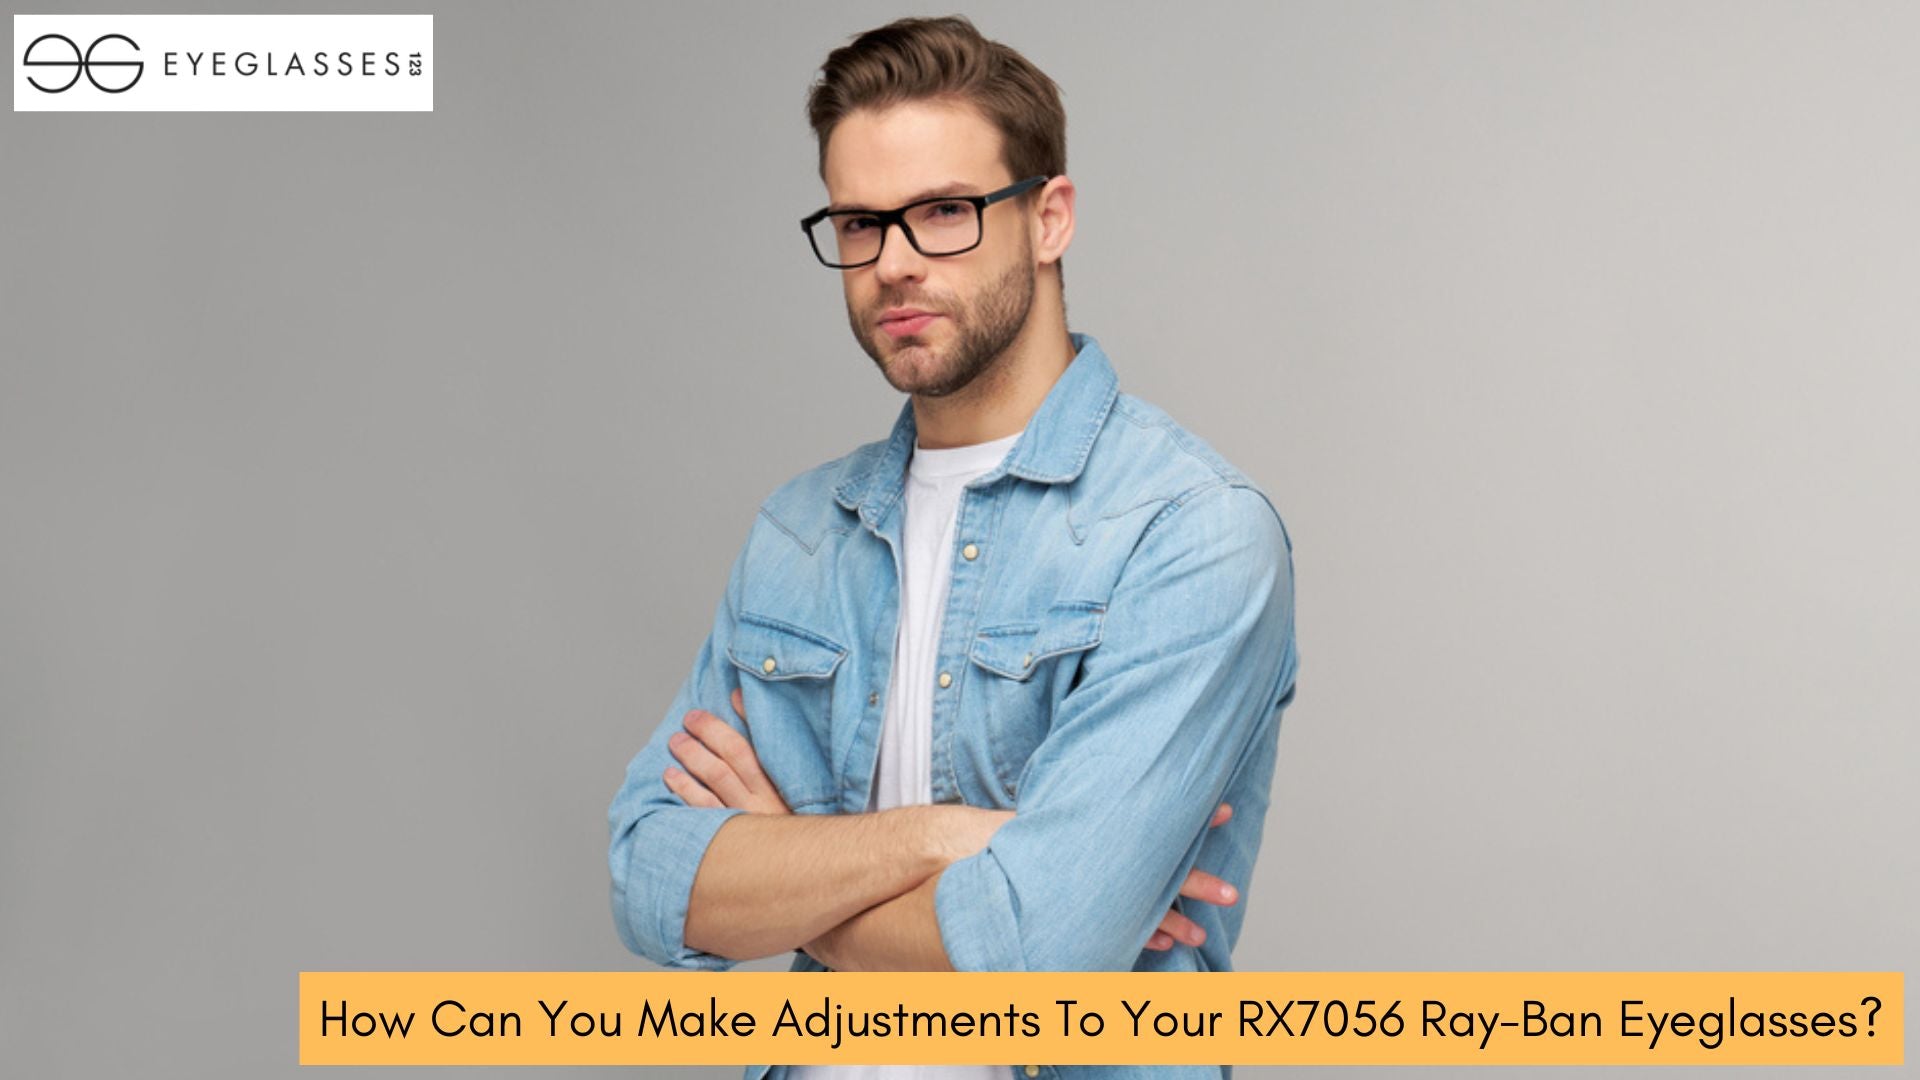 How Can You Make Adjustments To Your RX7056 Ray-Ban Eyeglasses?